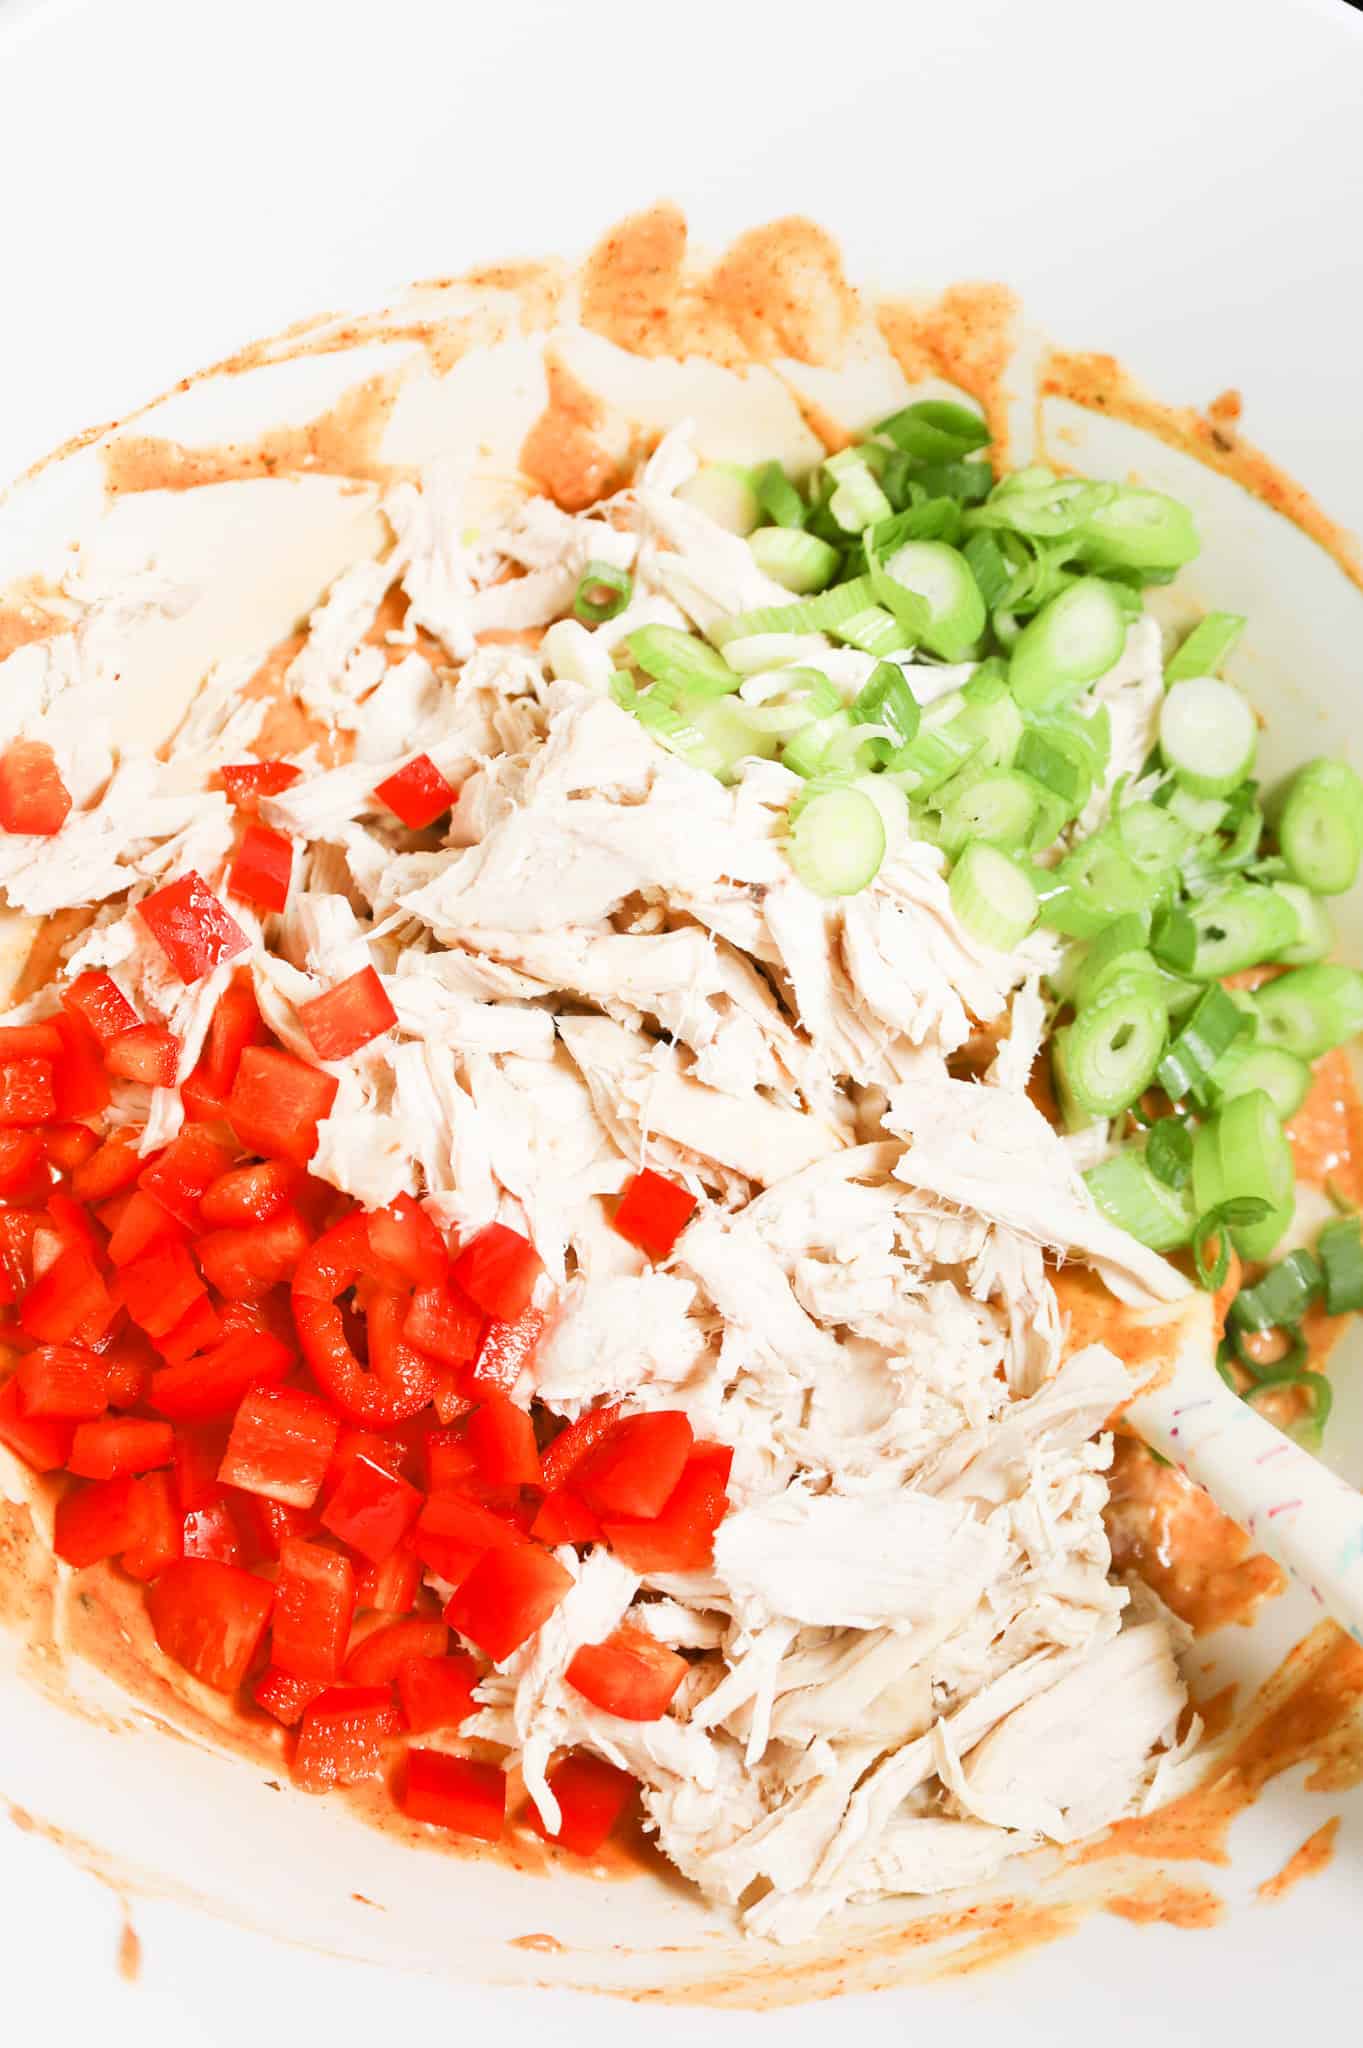 shredded rotisserie chicken, diced red bell peppers and chopped green onions on top of soup and salsa mixture in a mixing bowl